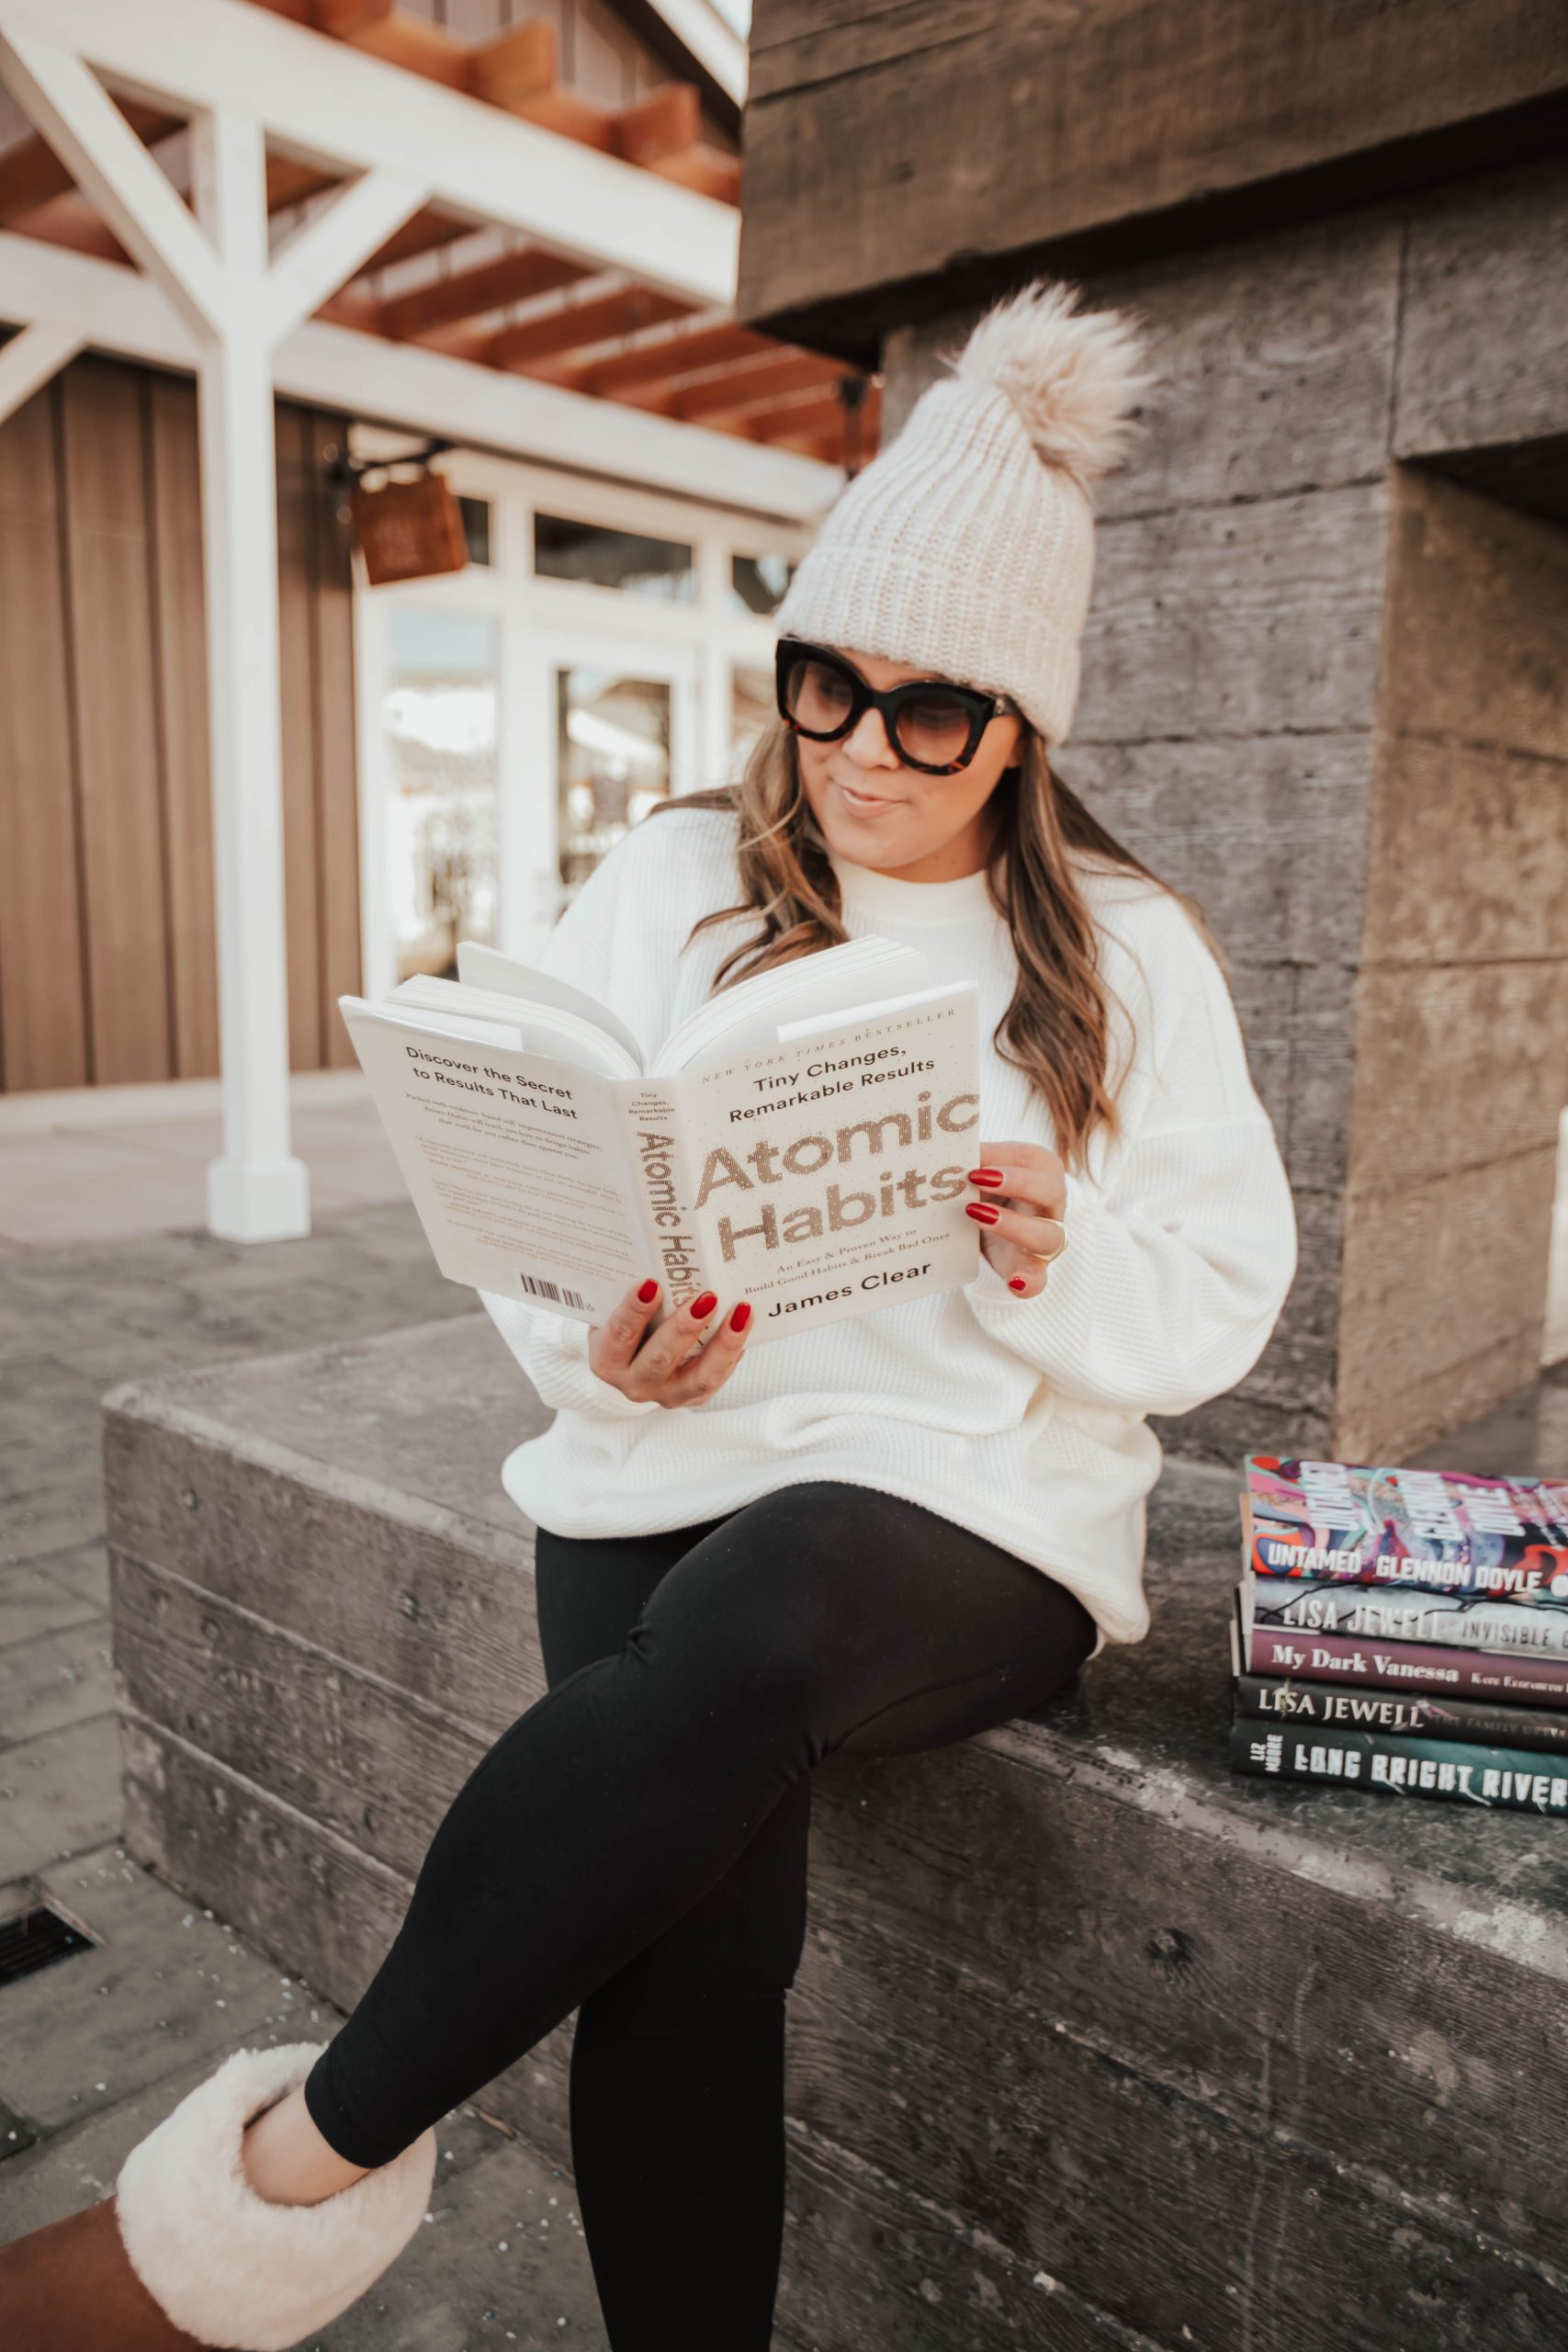 Reno blogger, Ashley Zeal Hurd, from the Ashley and Emily Blog shares a list of her top ten books of 2020 - there were so many good ones!